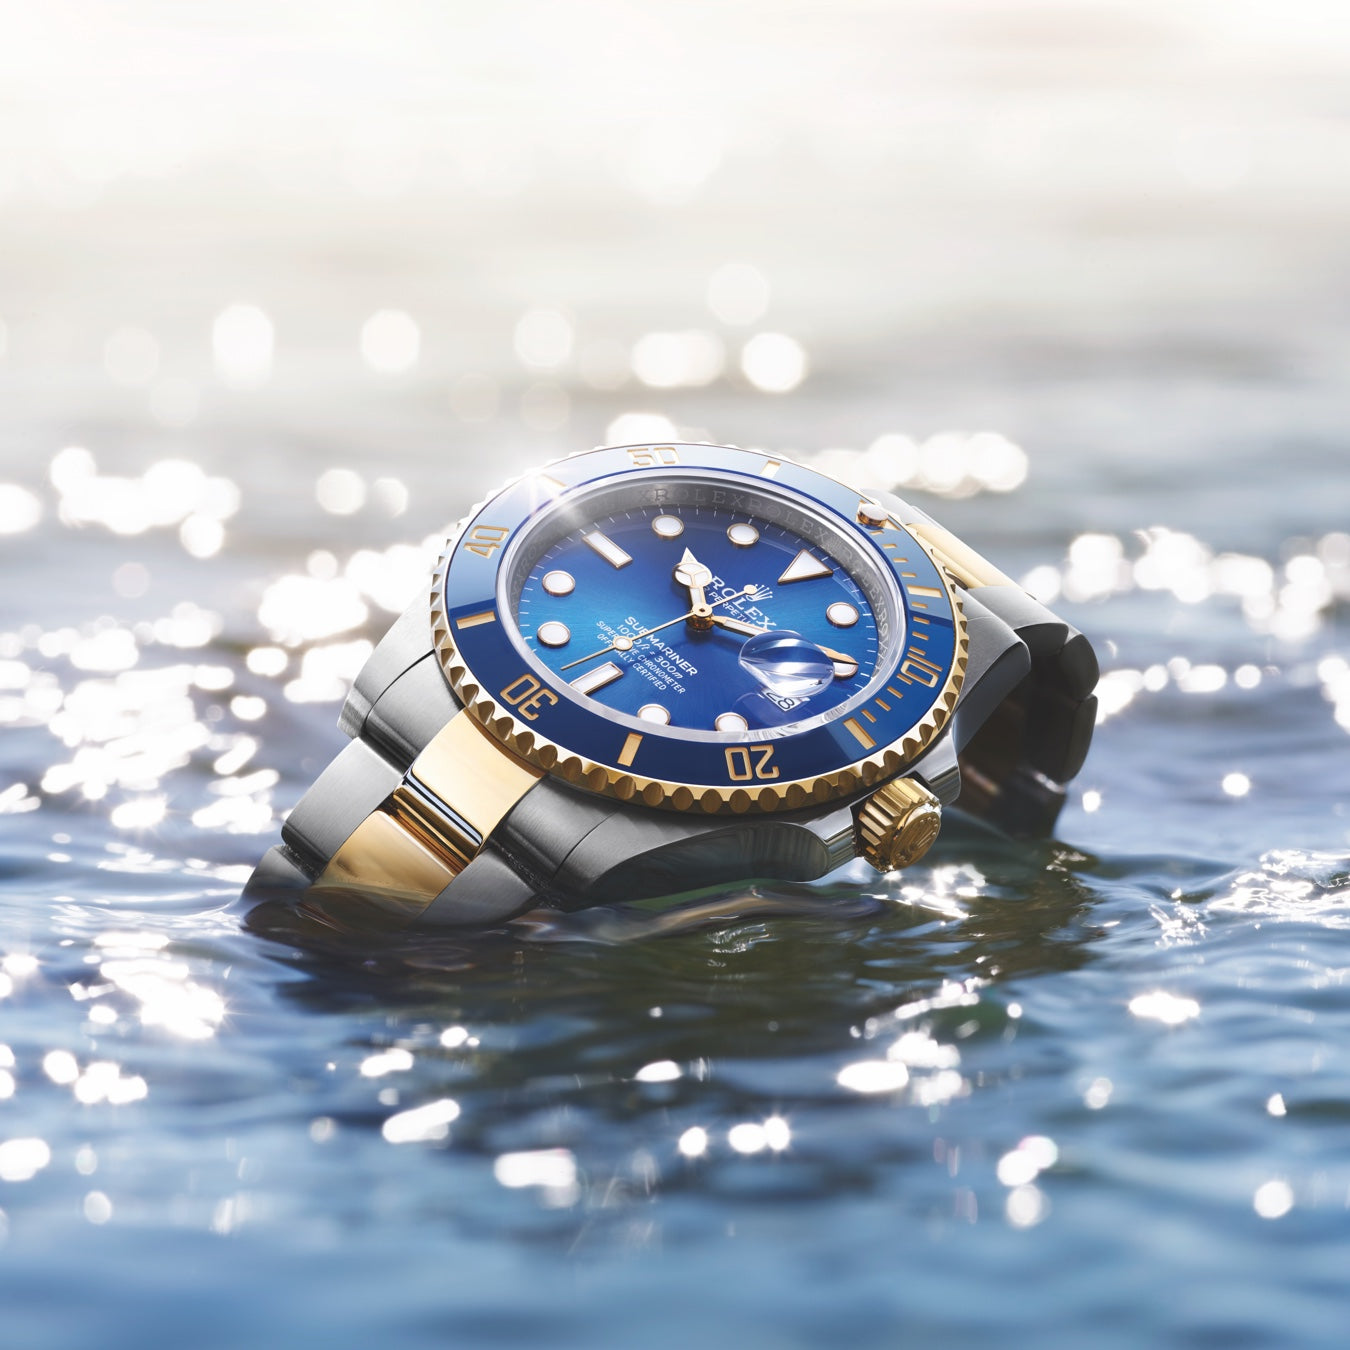 Oyster Perpetual Submariner: The reference among divers’ watches